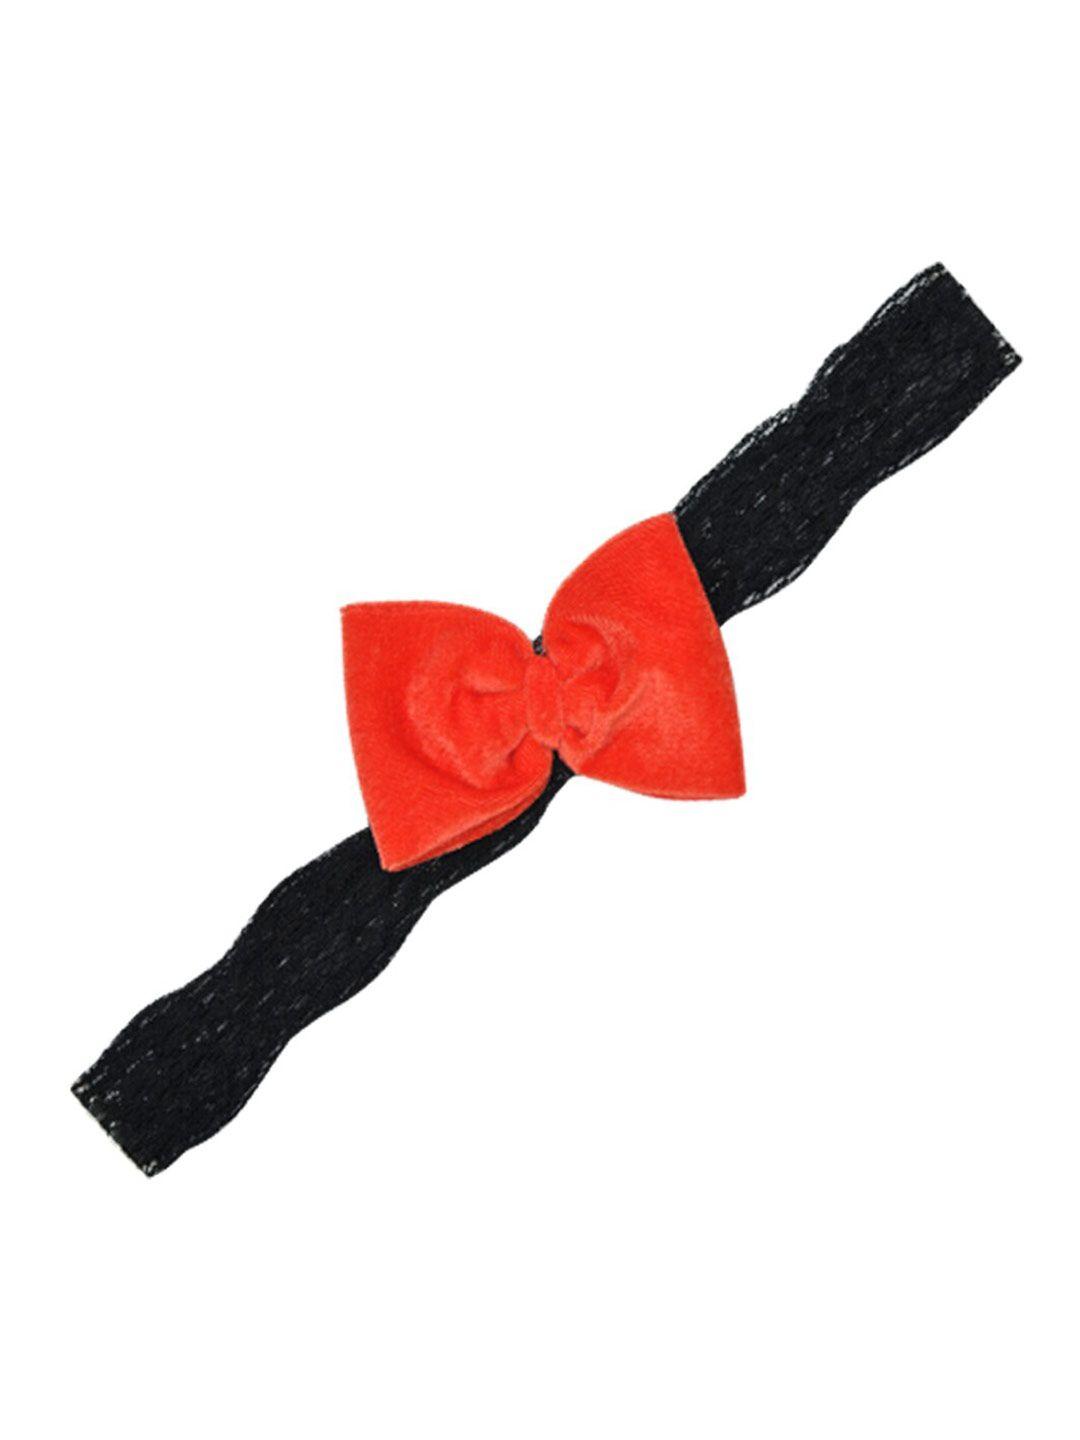 funkrafts girls black & red hairband with bow detail